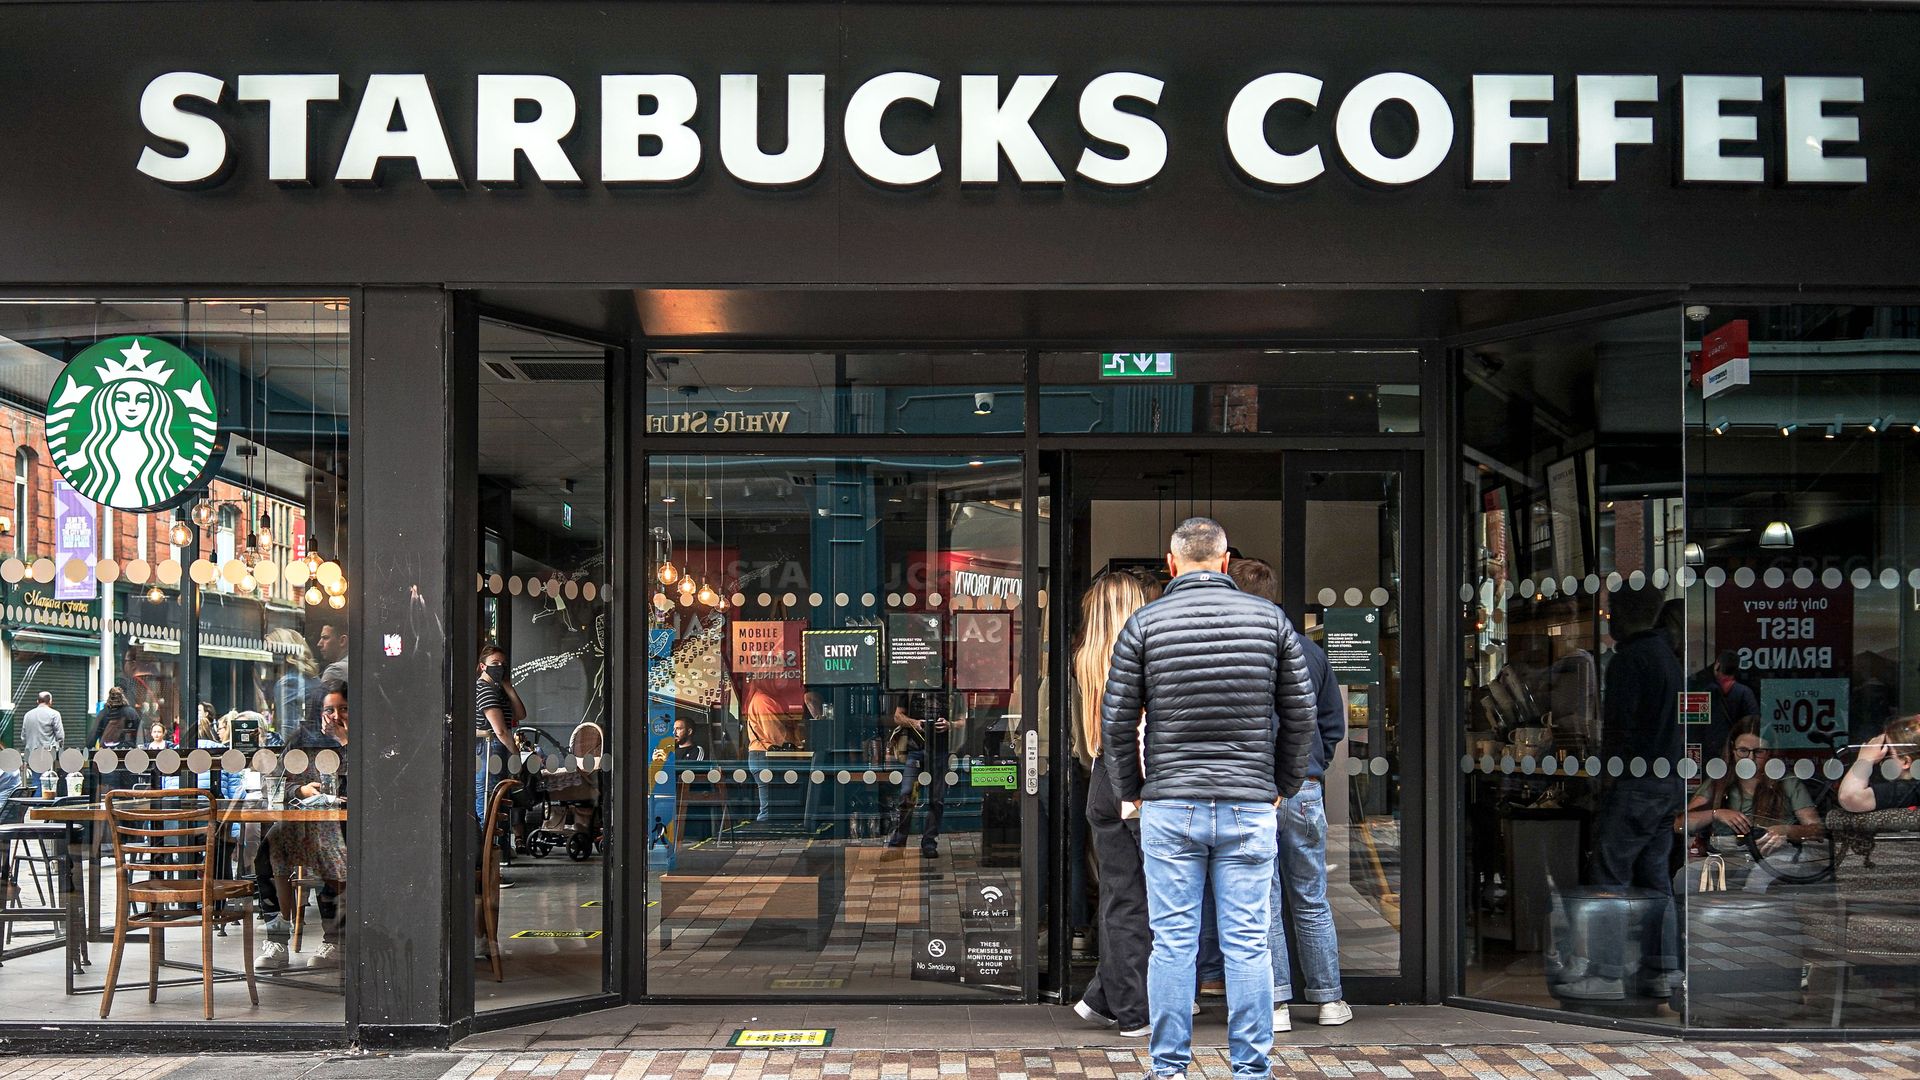 Customers line up to enter Starbucks Coffee in the U.K.